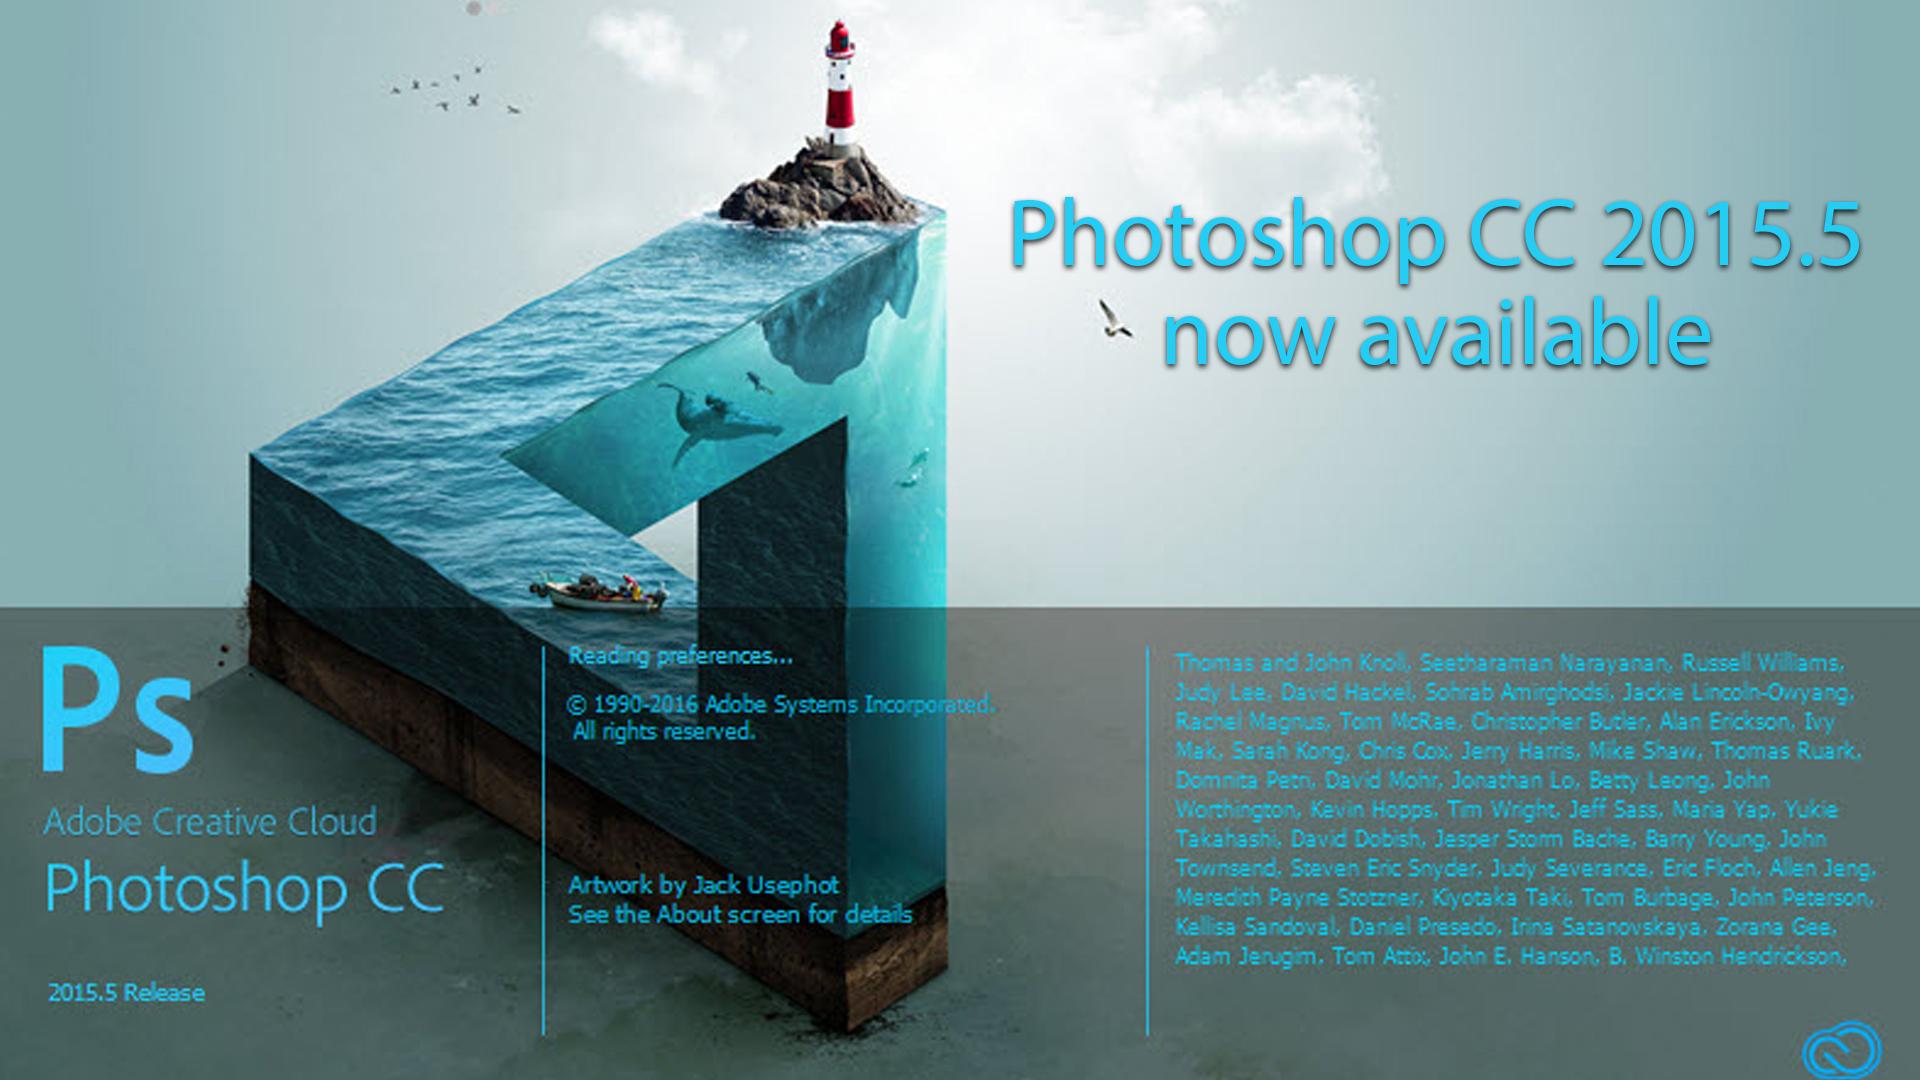 Adobe Creative Cloud Update Offers Great Features for Photographers